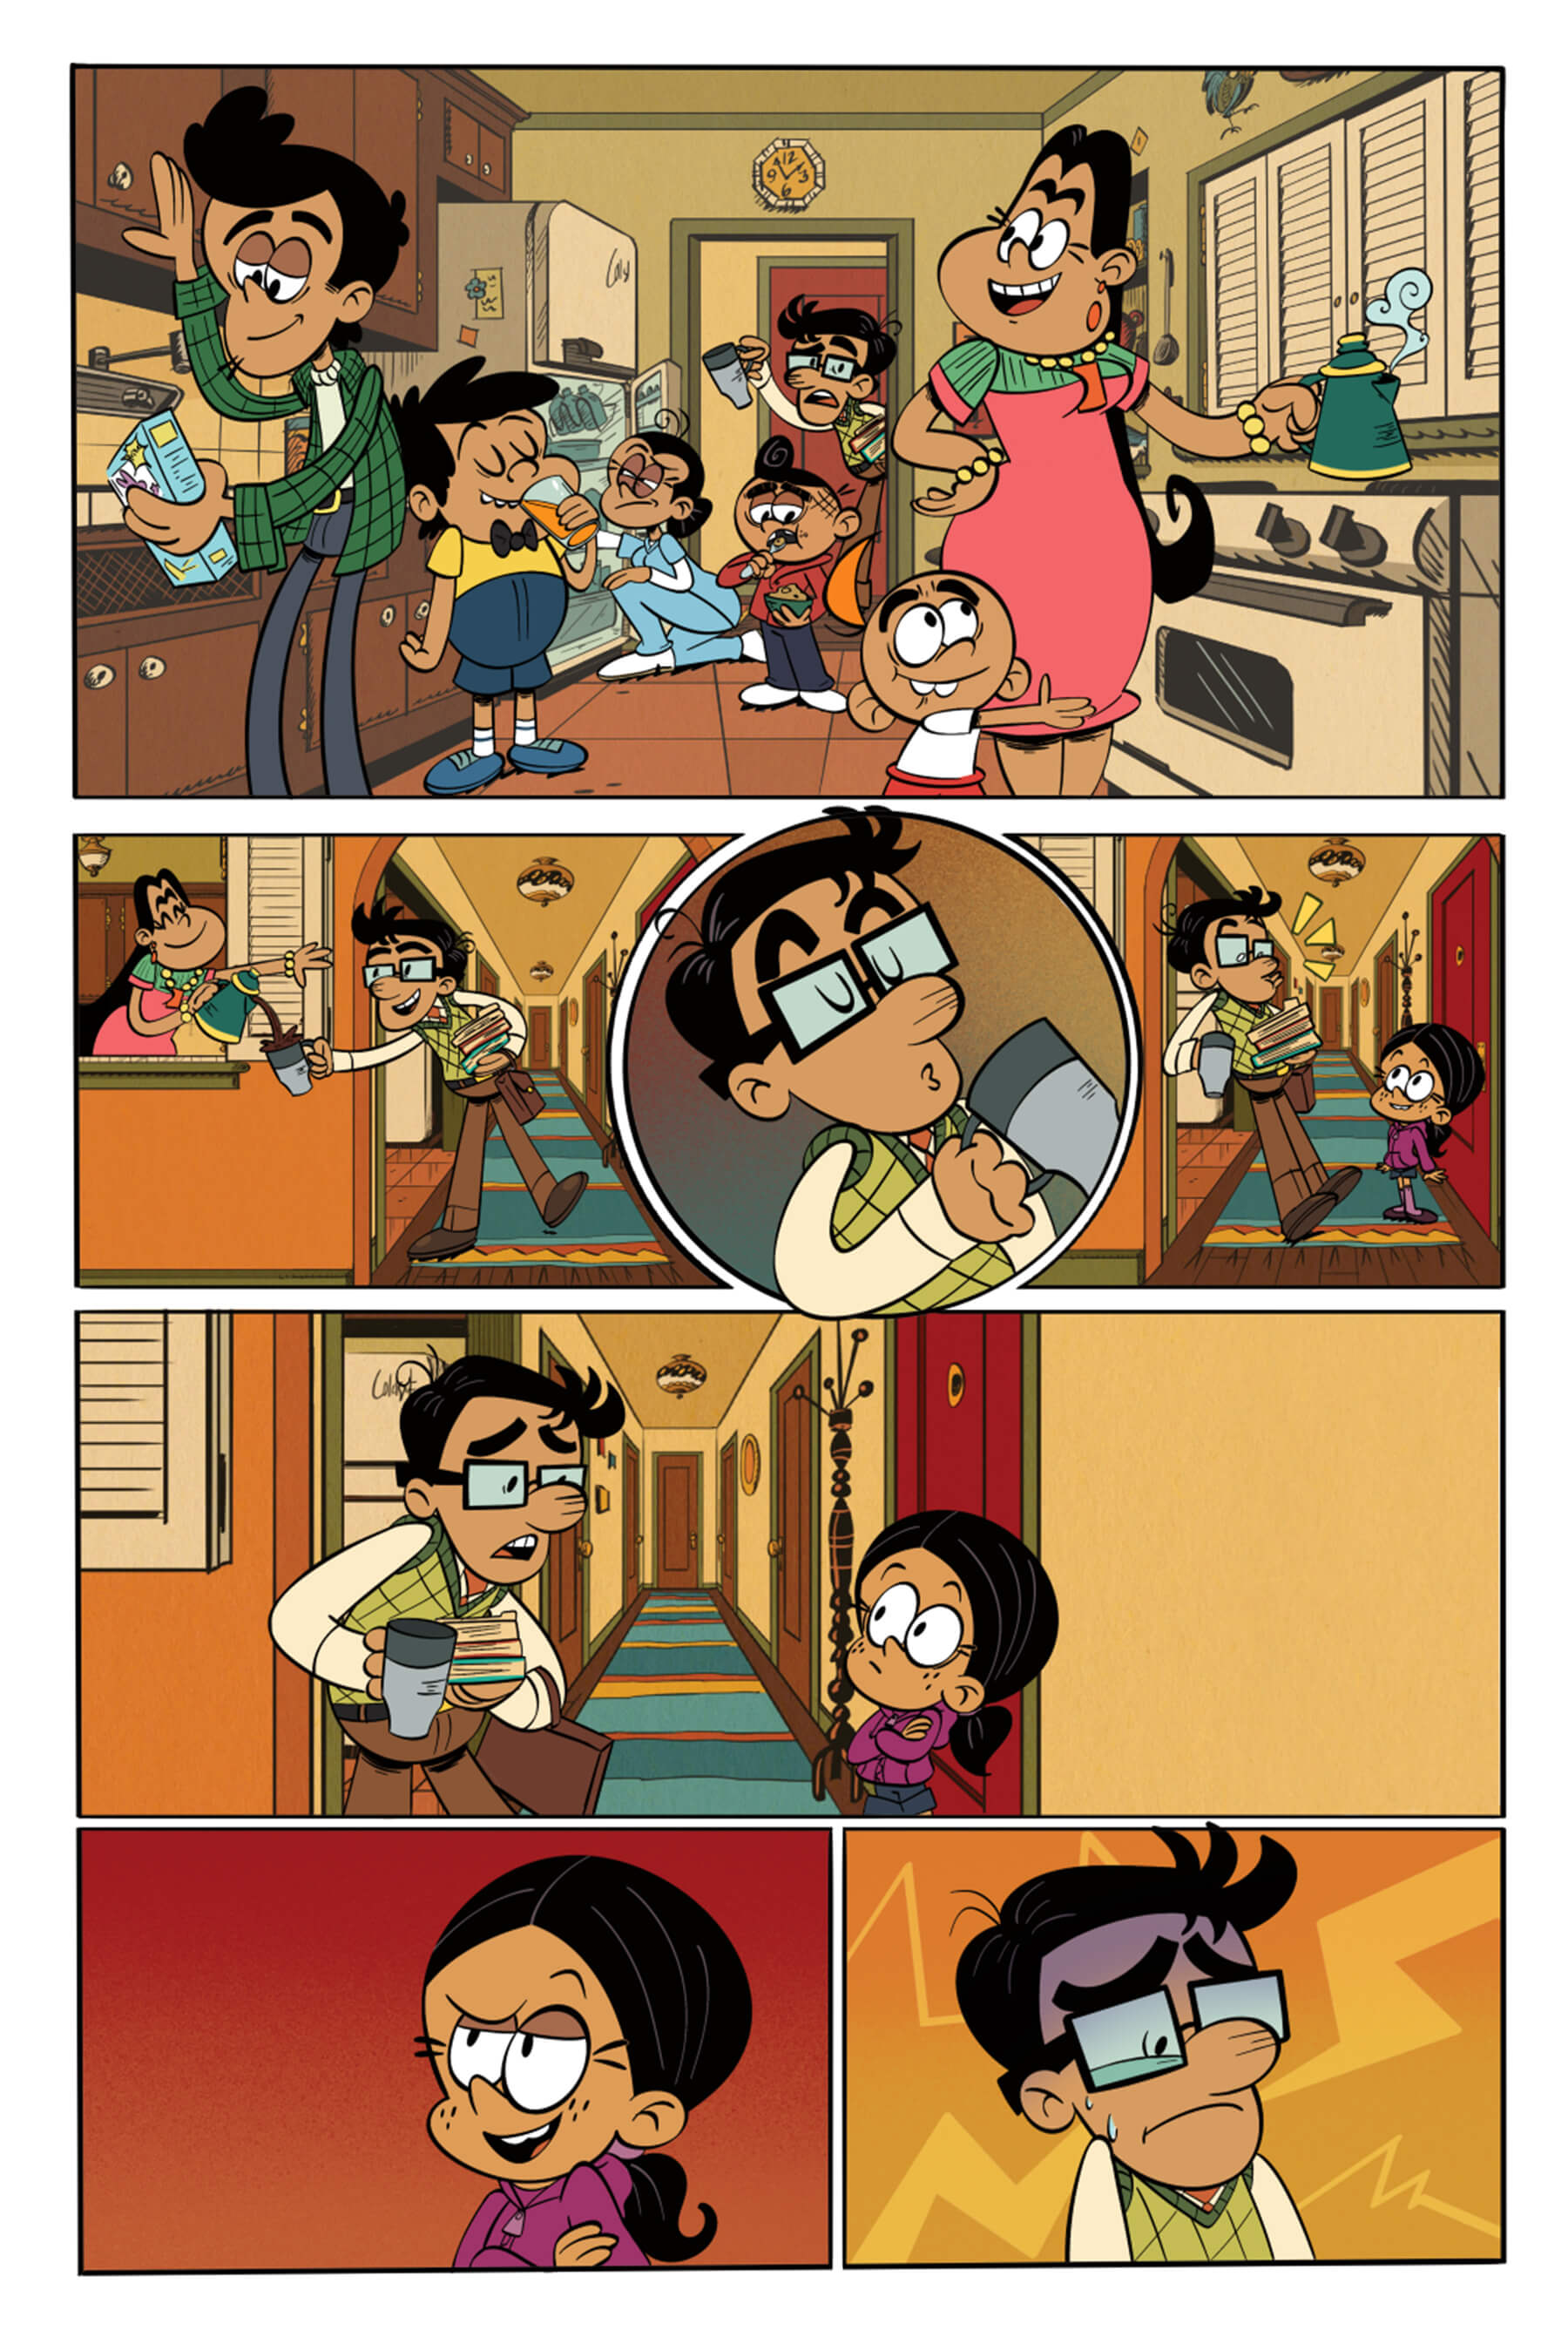 A colored comics page showing panels with characters from The Casagrandes.